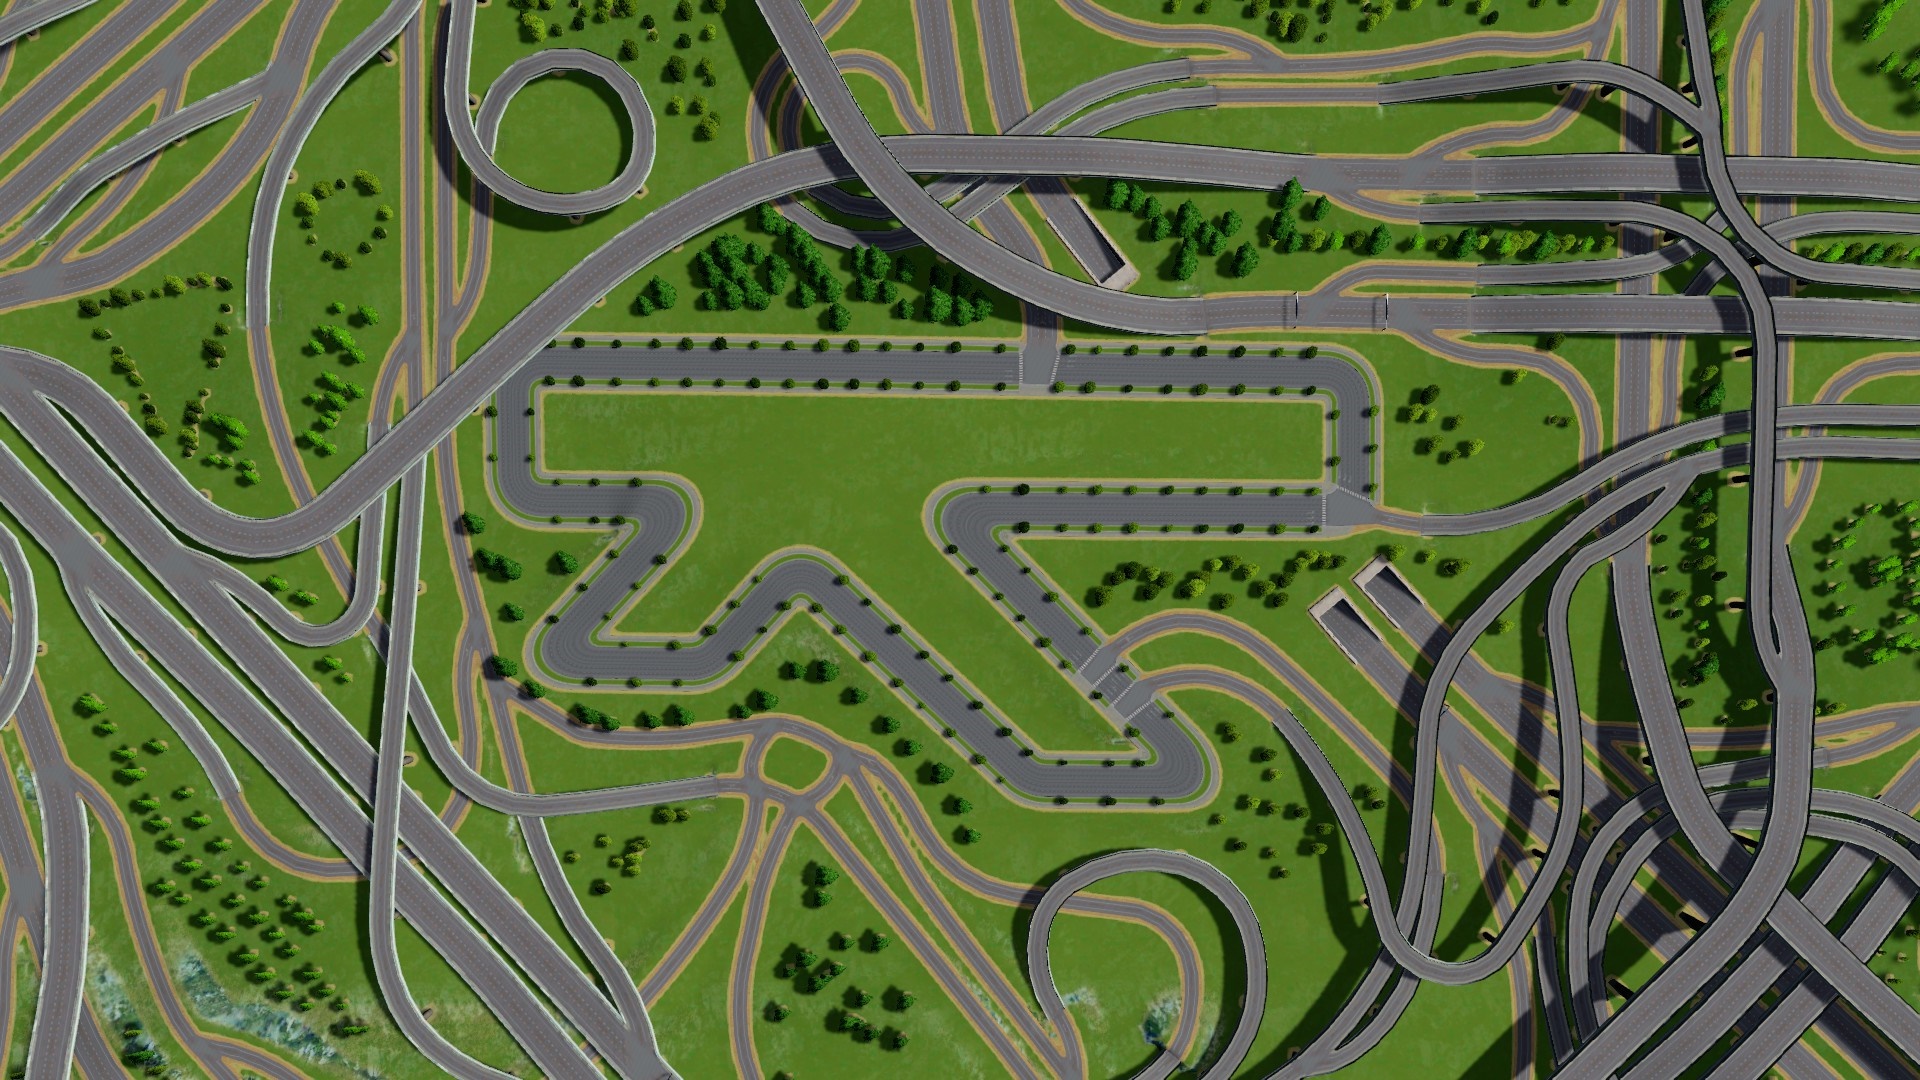 Cities Skylines Mods The Best Mods And Maps Pcgamesn